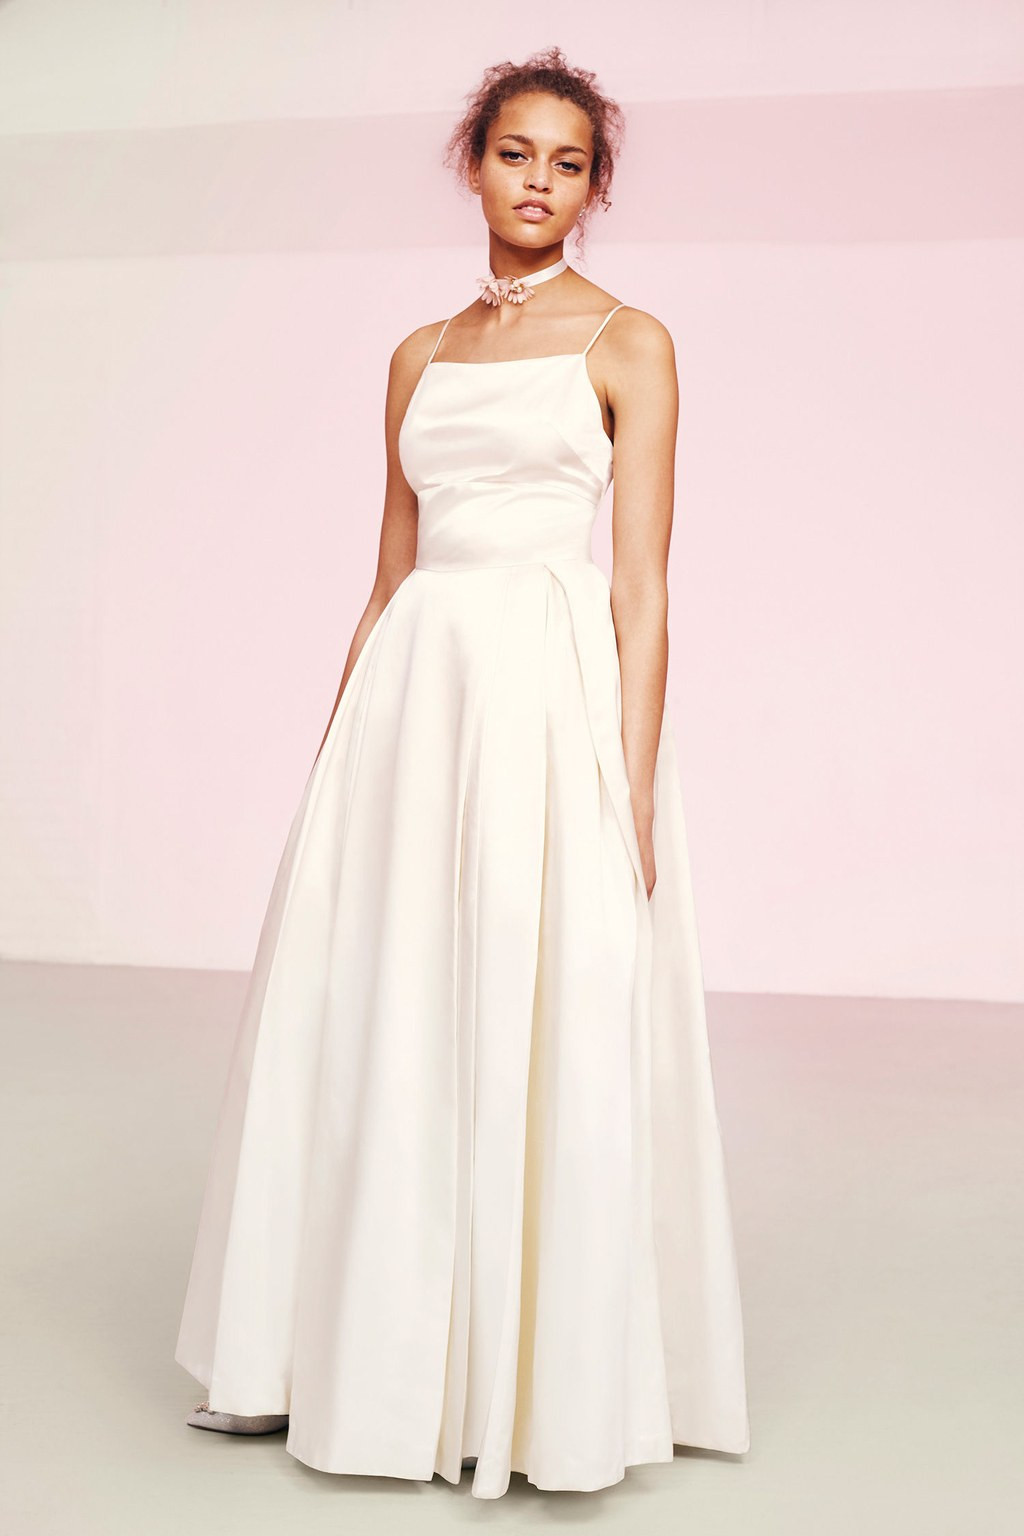 Wedding Gown Accessories
 ASOS Launches Its Own Line of Wedding Dresses and Wedding